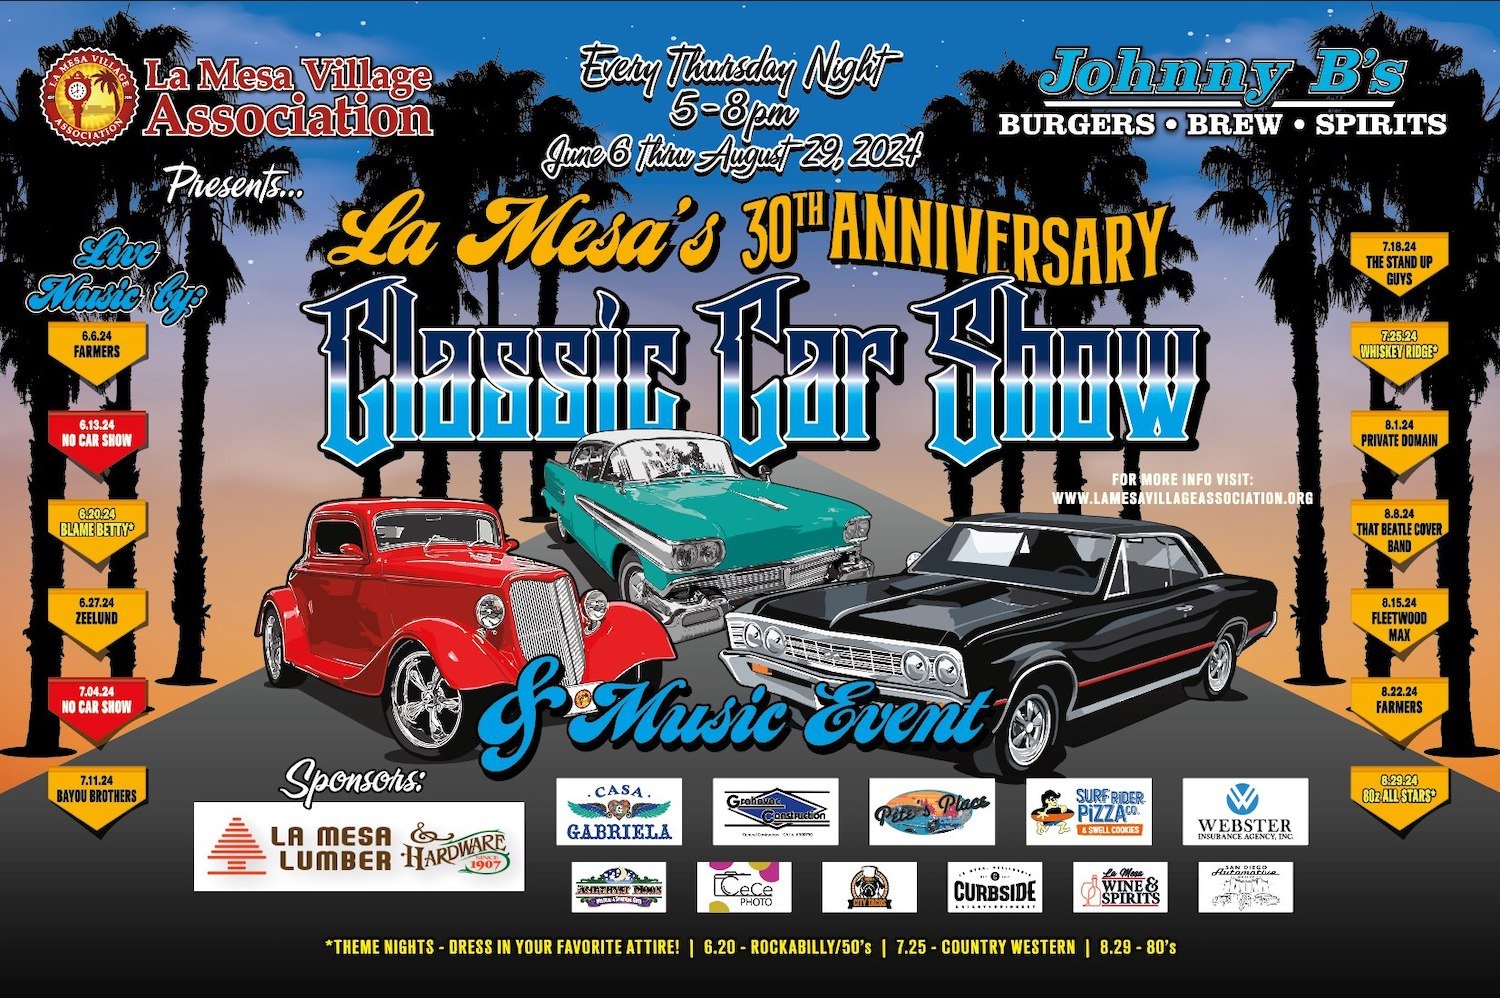 San Diego events this weekend including the La Mesa Classic Car Show & Music Event happening each Thursday until August 29, 2024